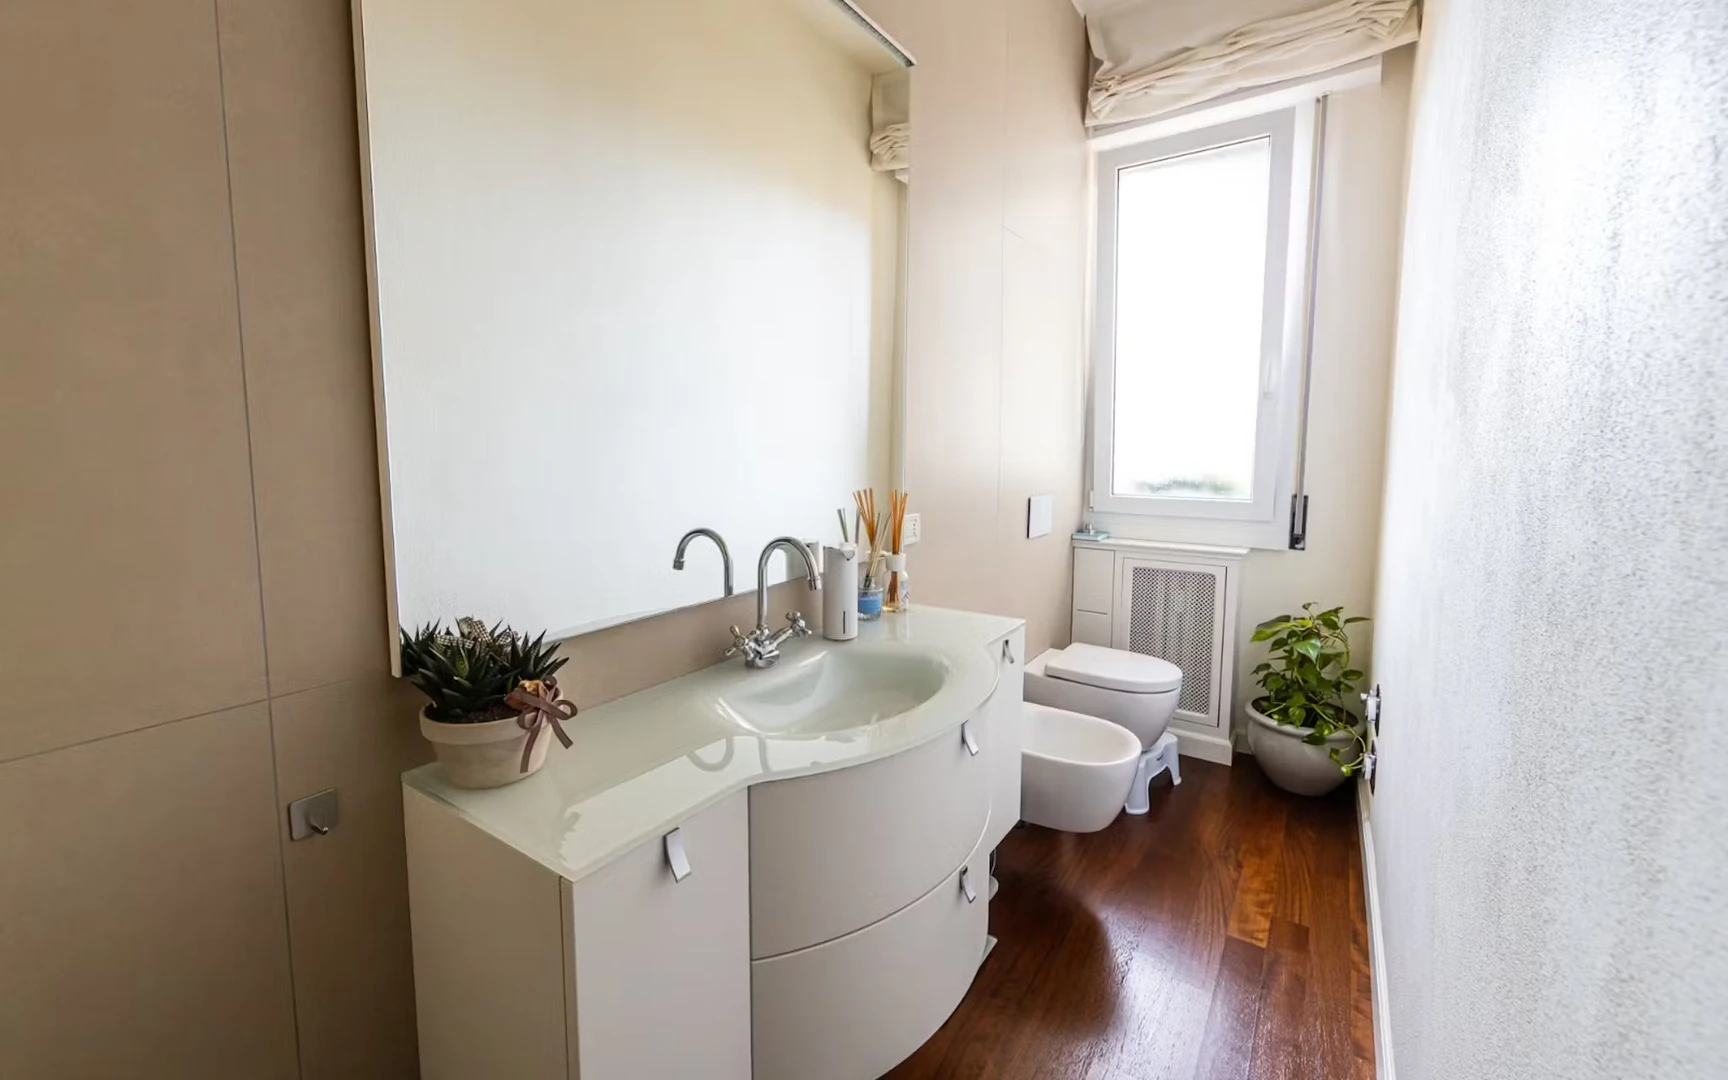 Shared room in 3-bedroom flat Bologna